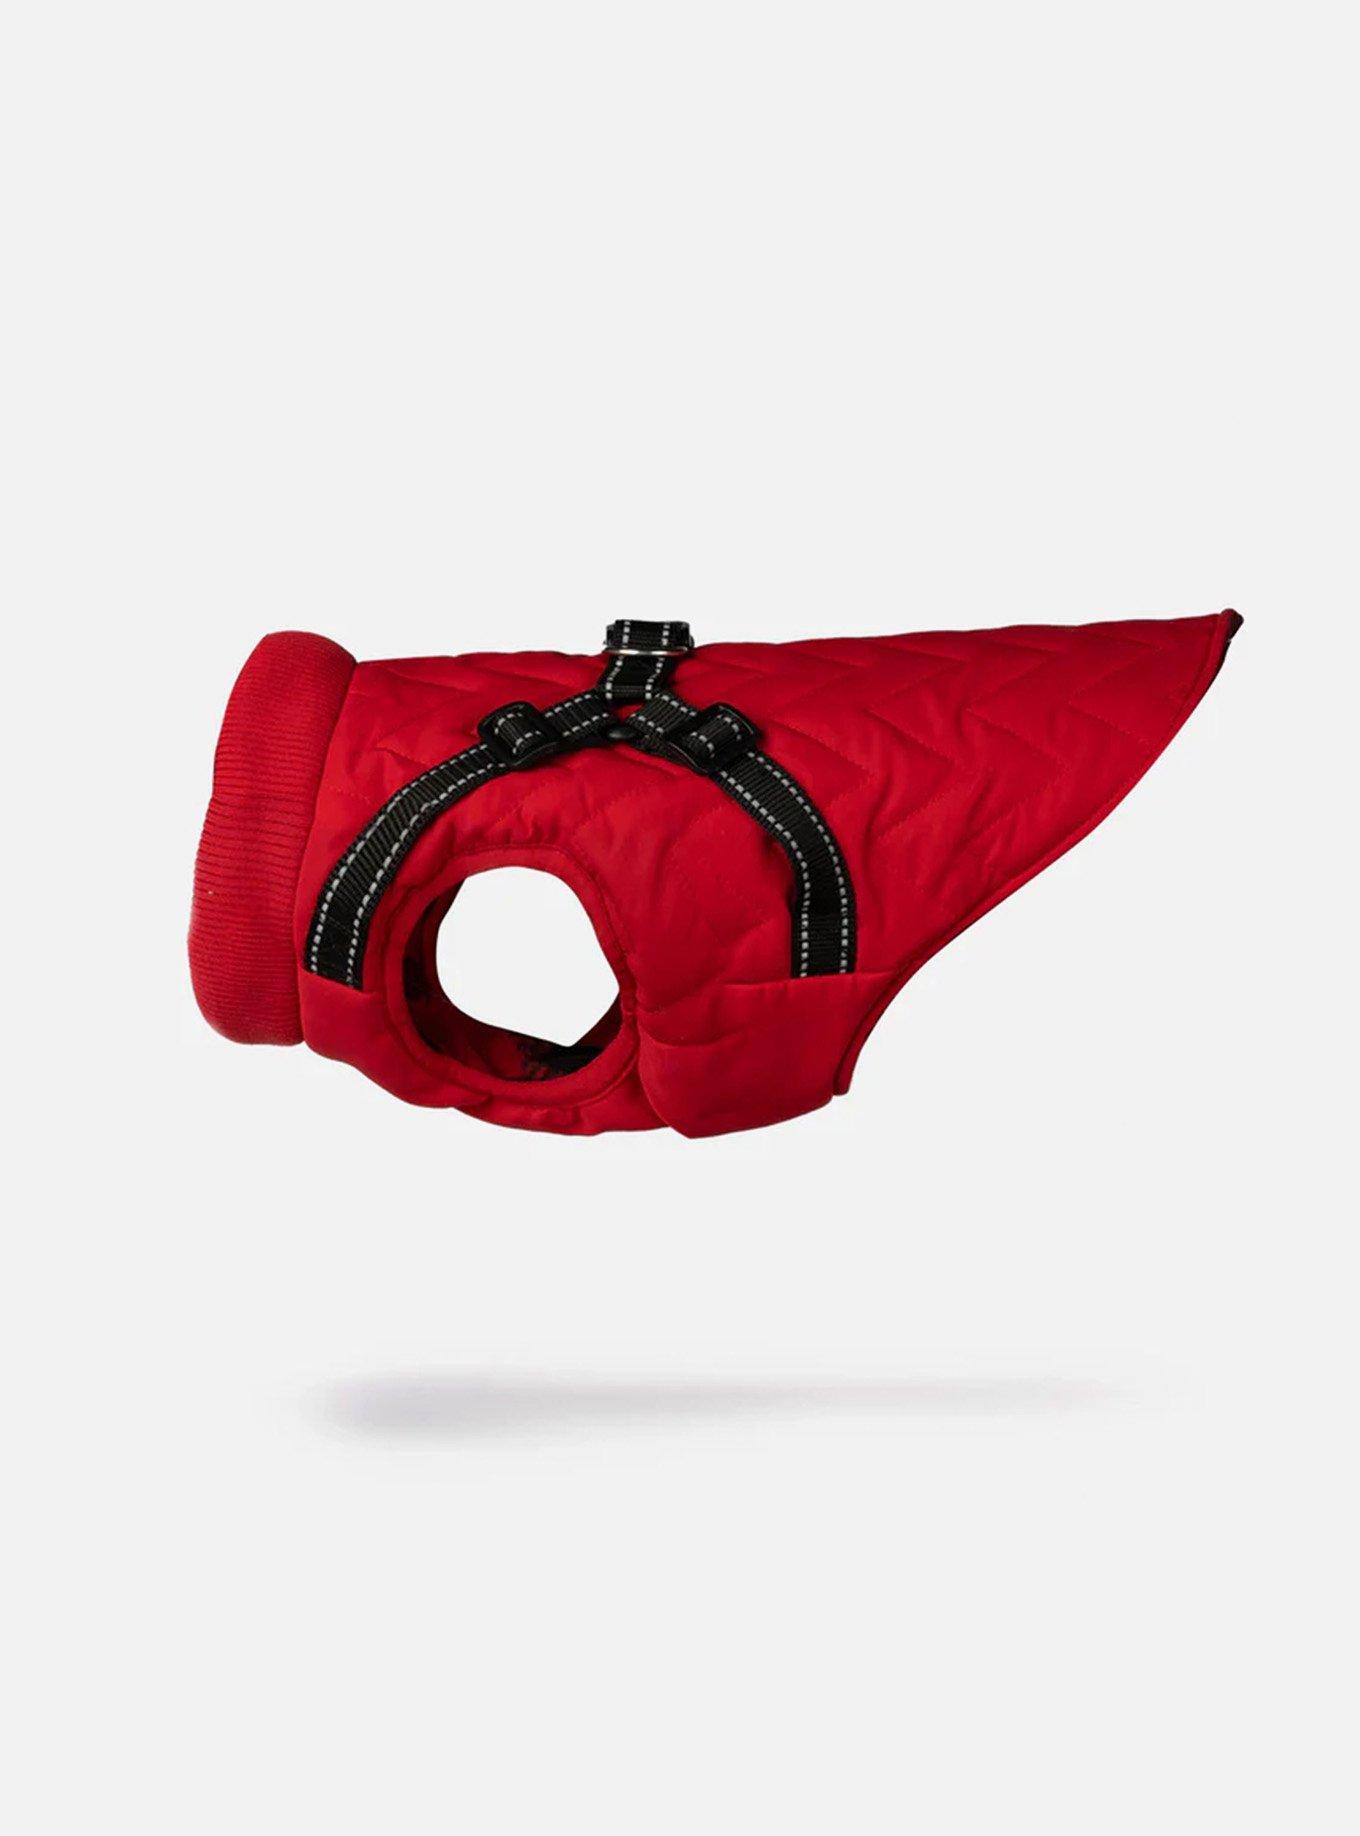 Quilted Dog Jacket With Built-In Harness Red, RED, hi-res